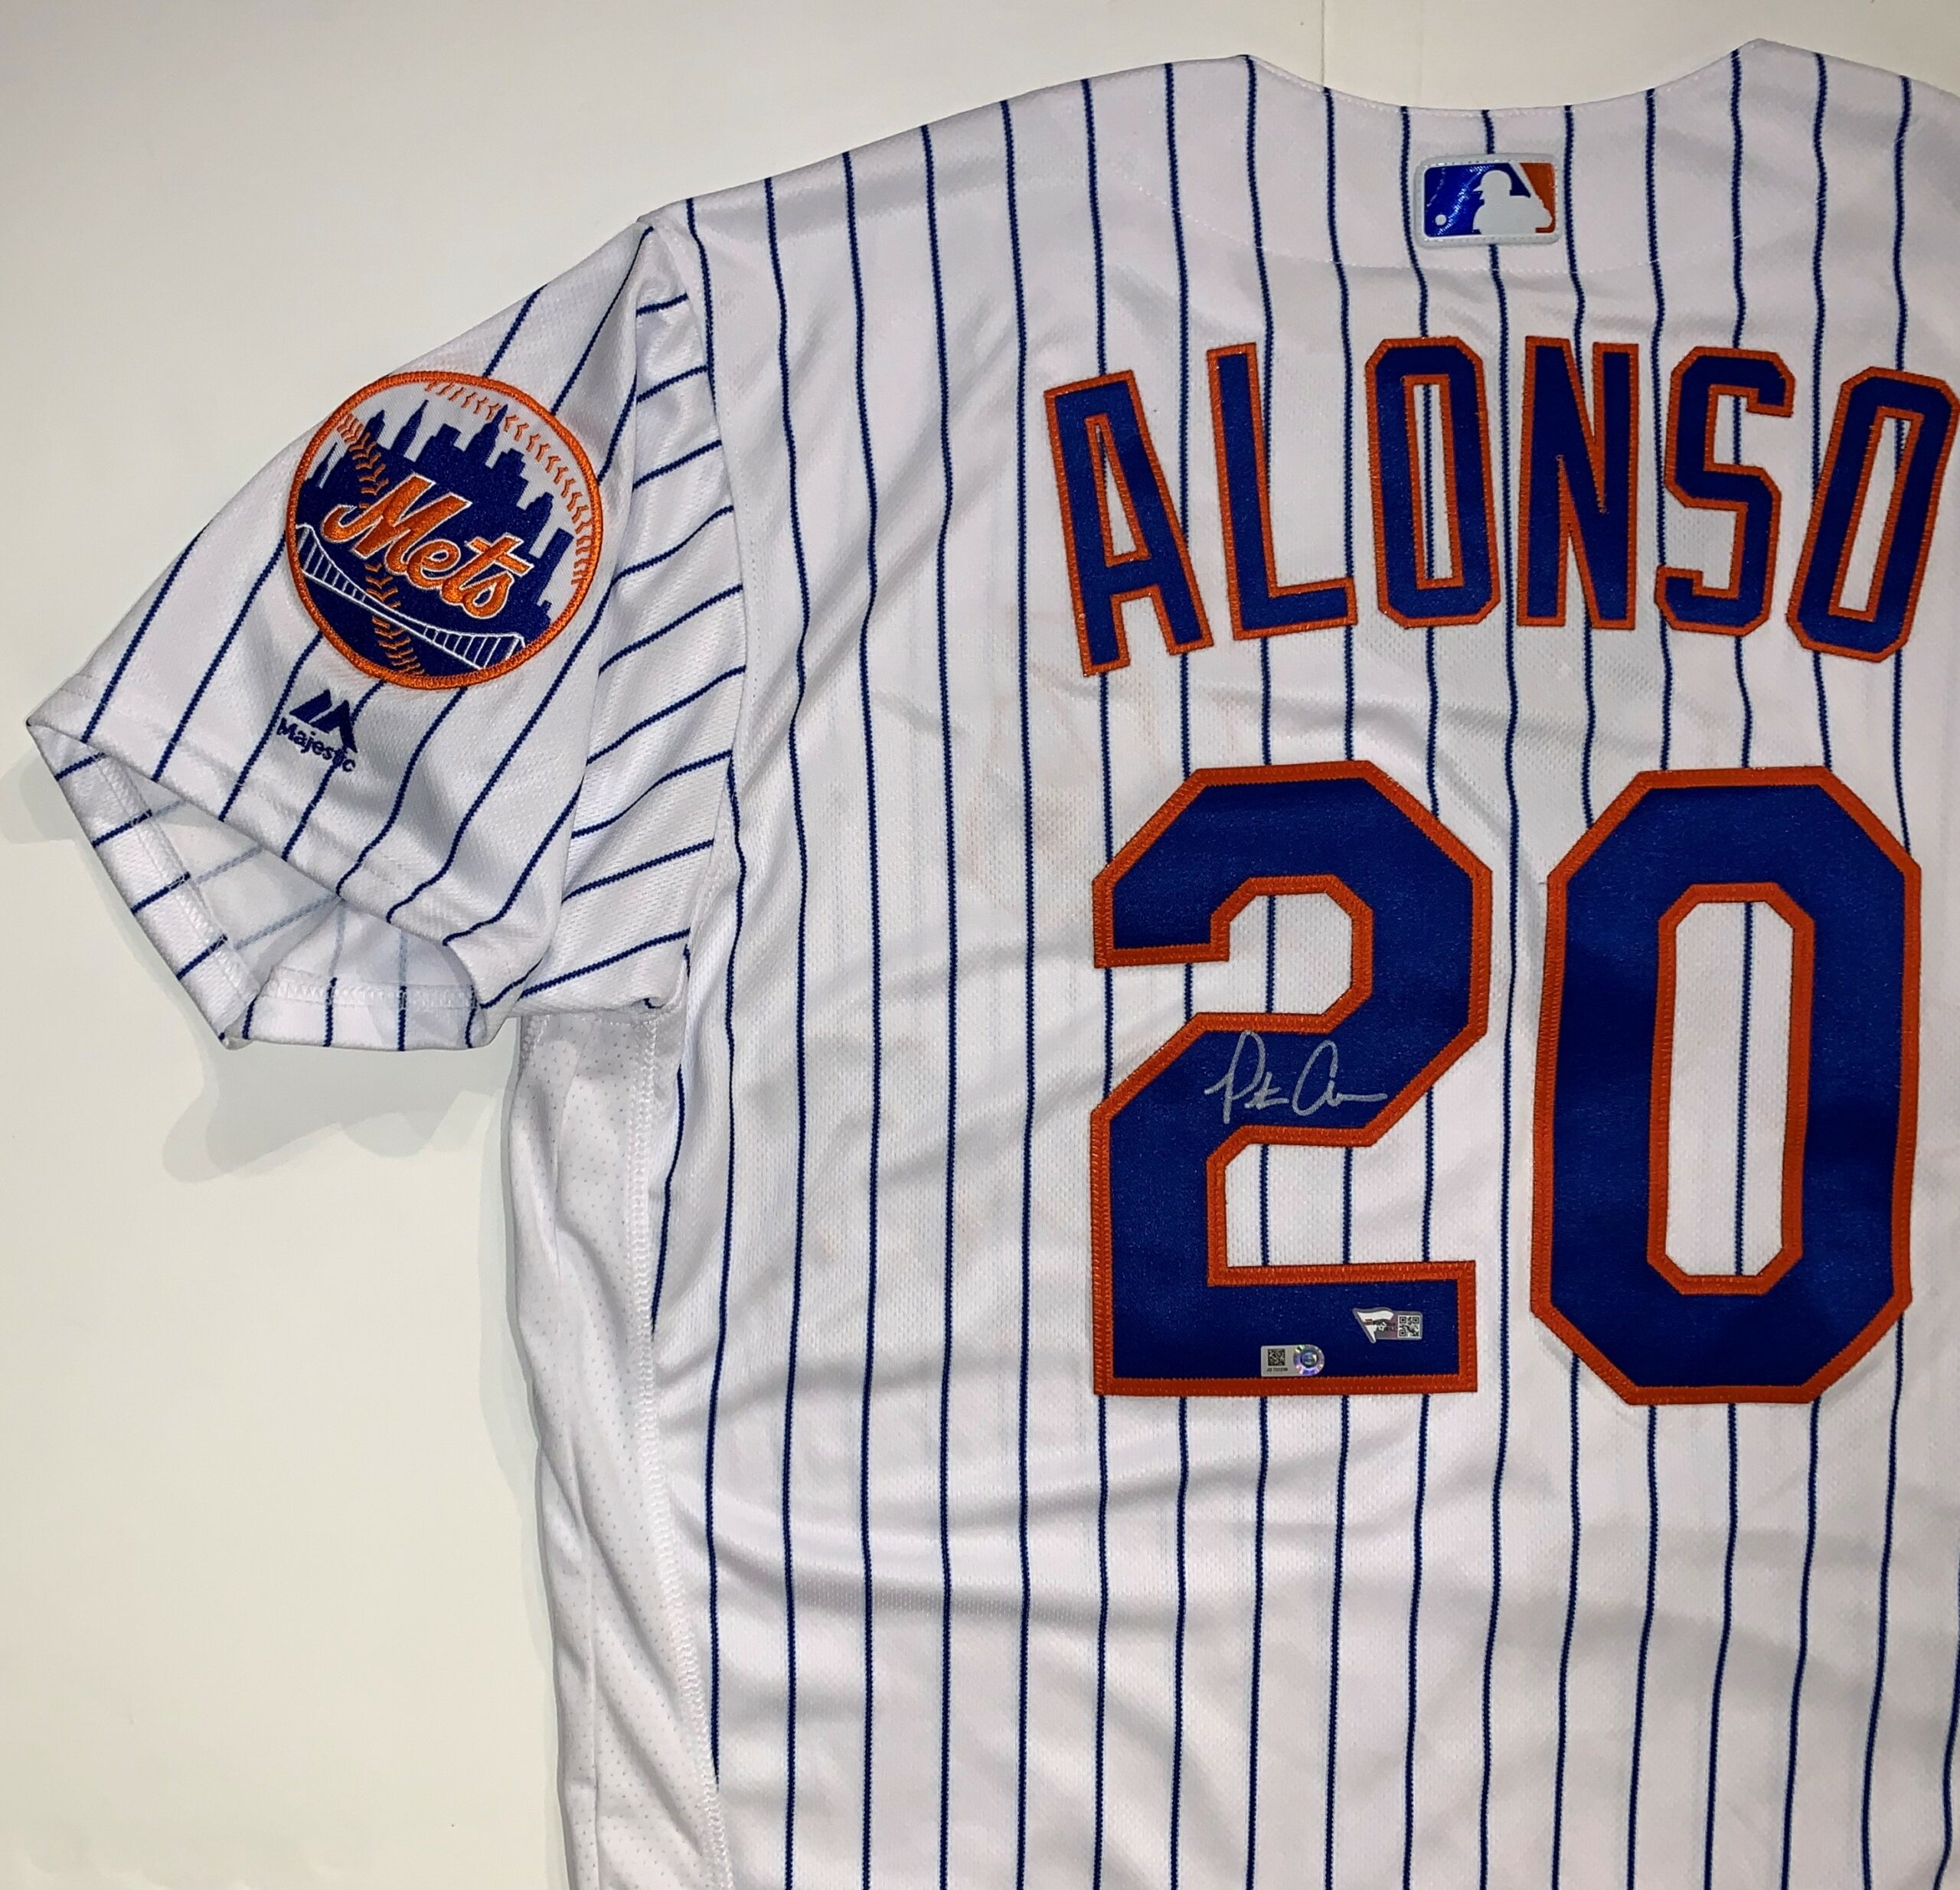 Pete Alonso Signed National New York Mets All-Star Jersey (JSA COA)